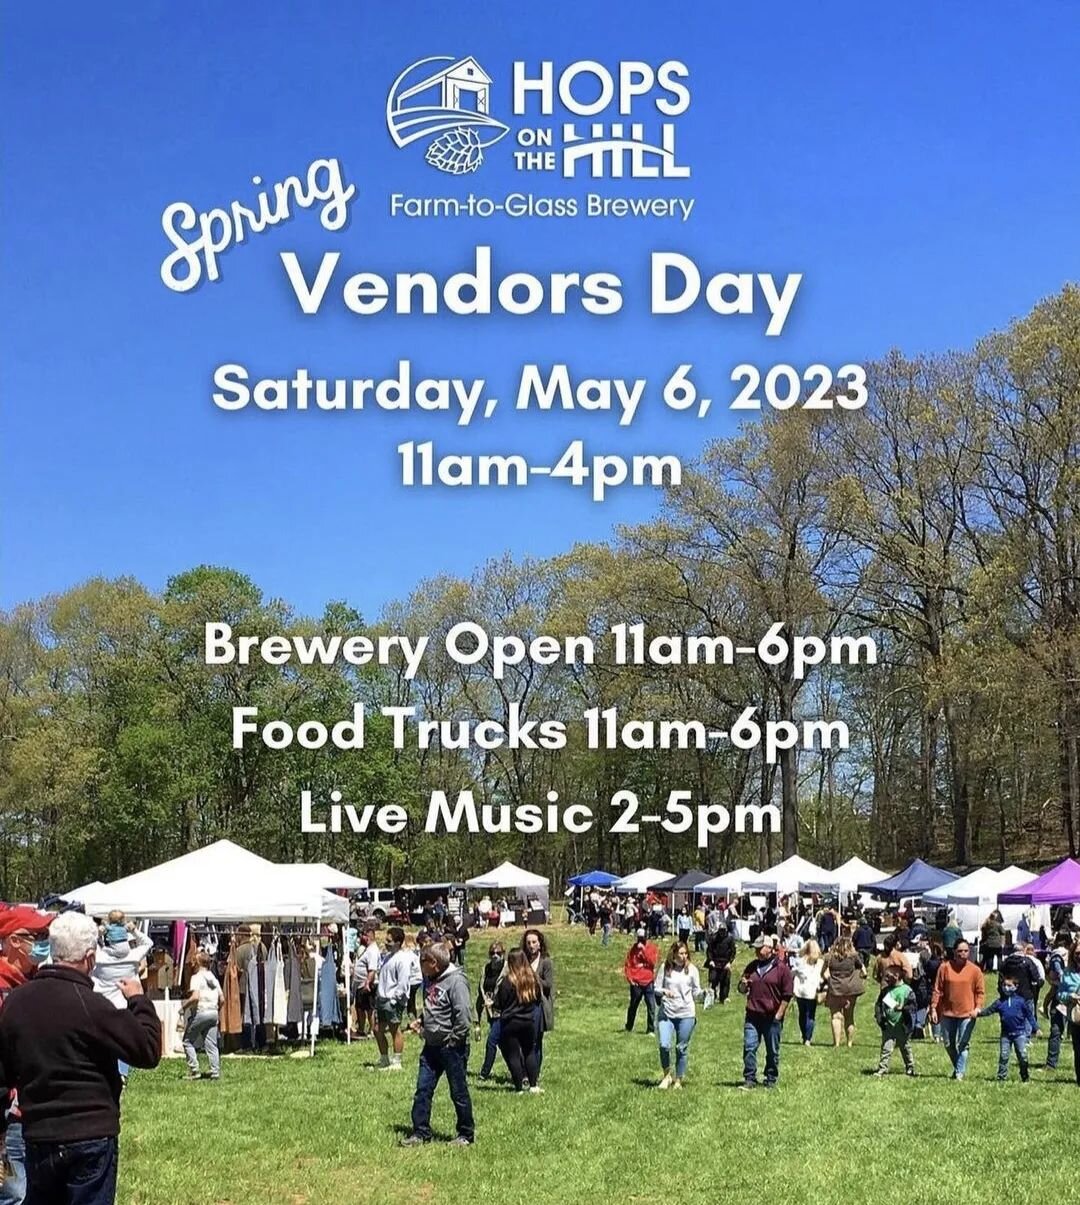 Come see us and over 60 vendors for this amazing event 
#lawofattraction #vendorevent #intentionsetting #beer #hops #crystals #leatherwork #joy #changeyourworld